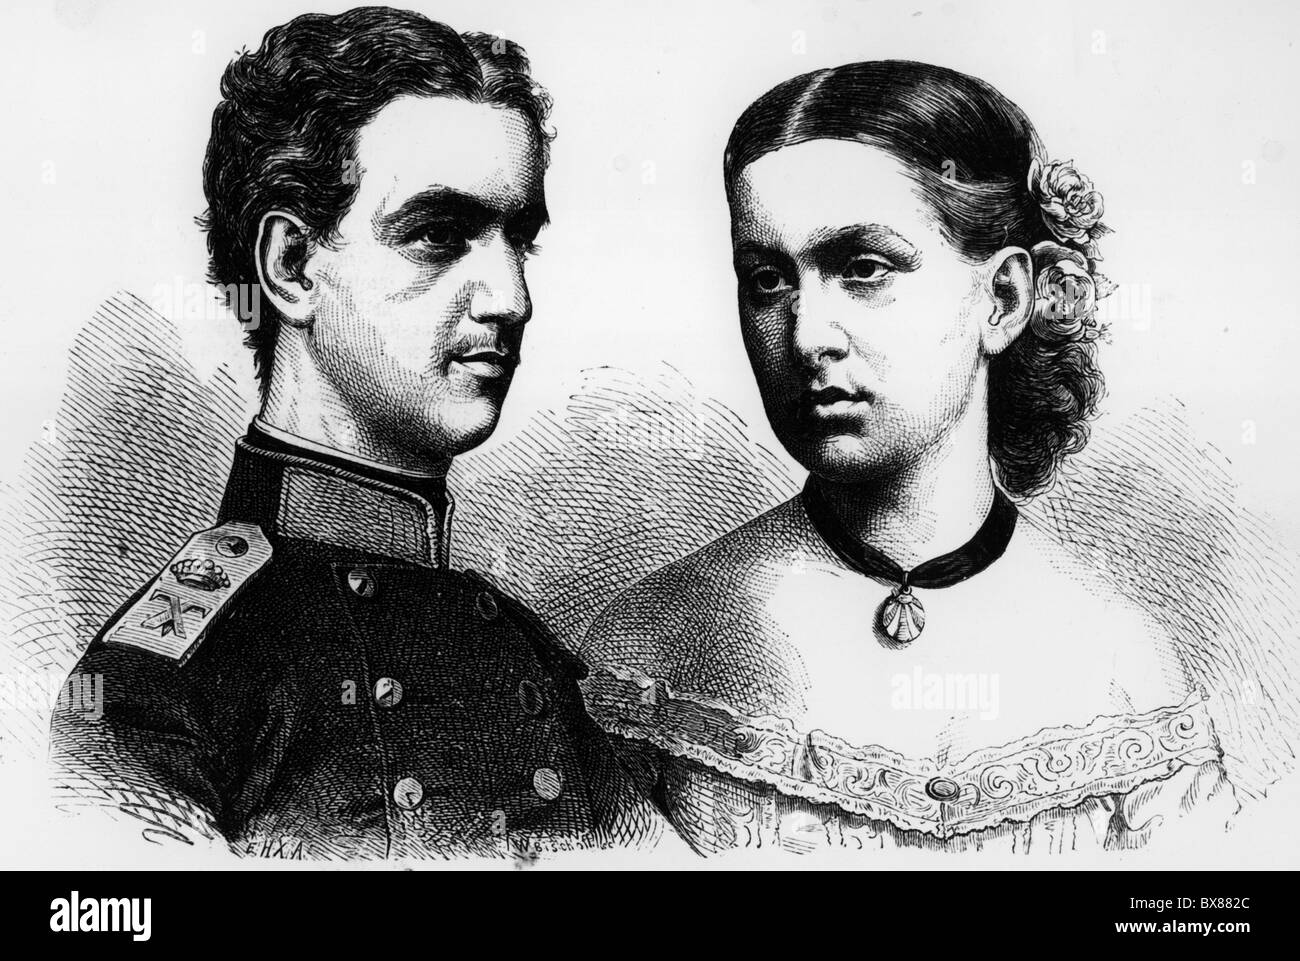 George I, 24.12.1845 - 18.3.1913, King of Greece 30.3.1863 - 18.3.1913, with wife Queen Olga, portrait, wood engraving after drawing by Kriehuber, circa 1870, , Stock Photo